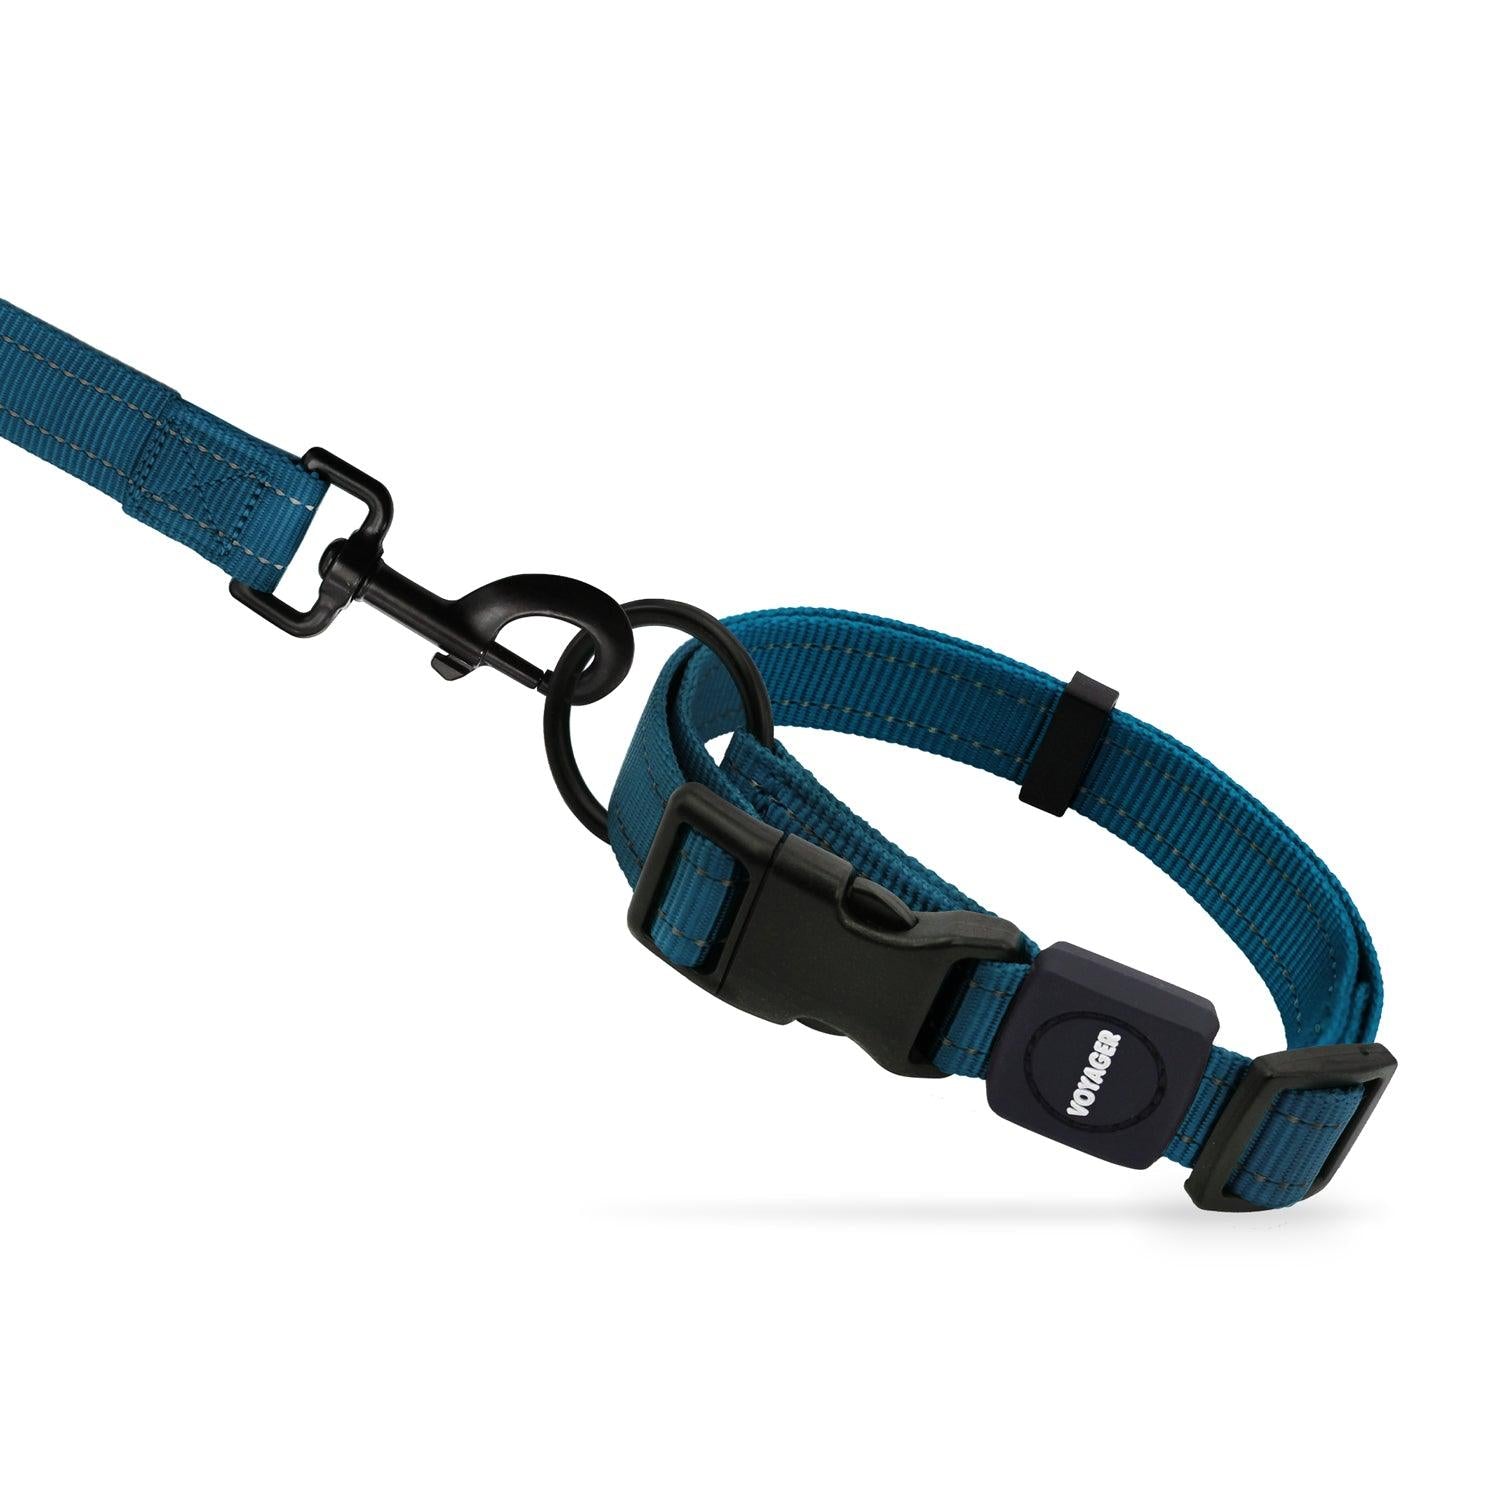 Voyager Leash and Collar Set - VOYAGER Dog Harnesses